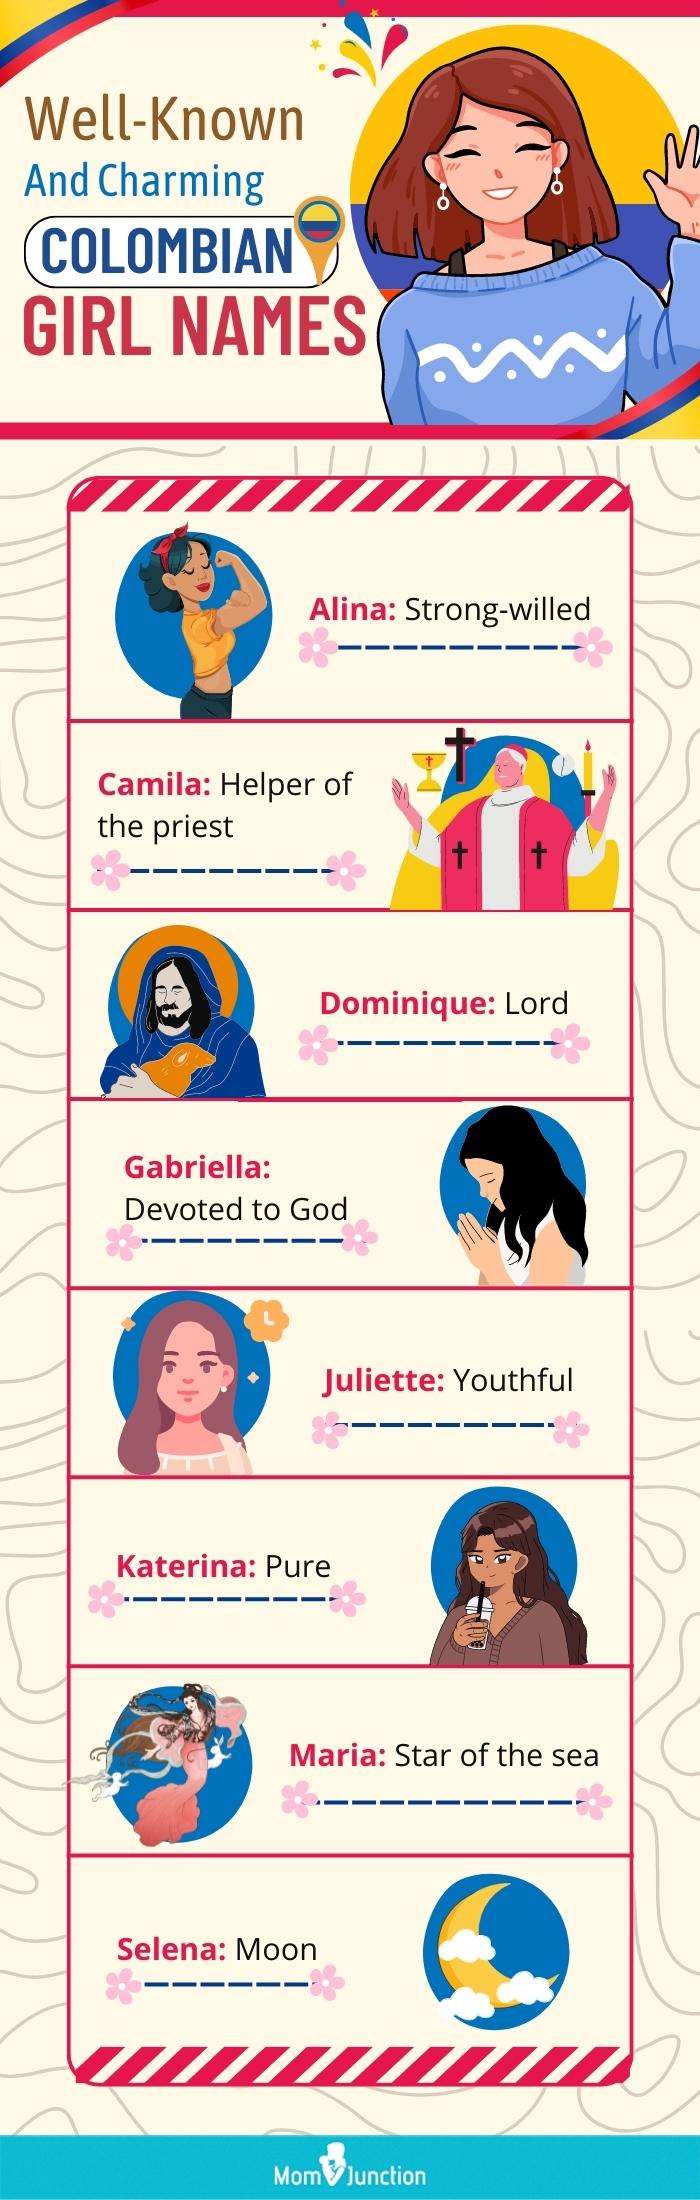 colombian girl names [infographic]